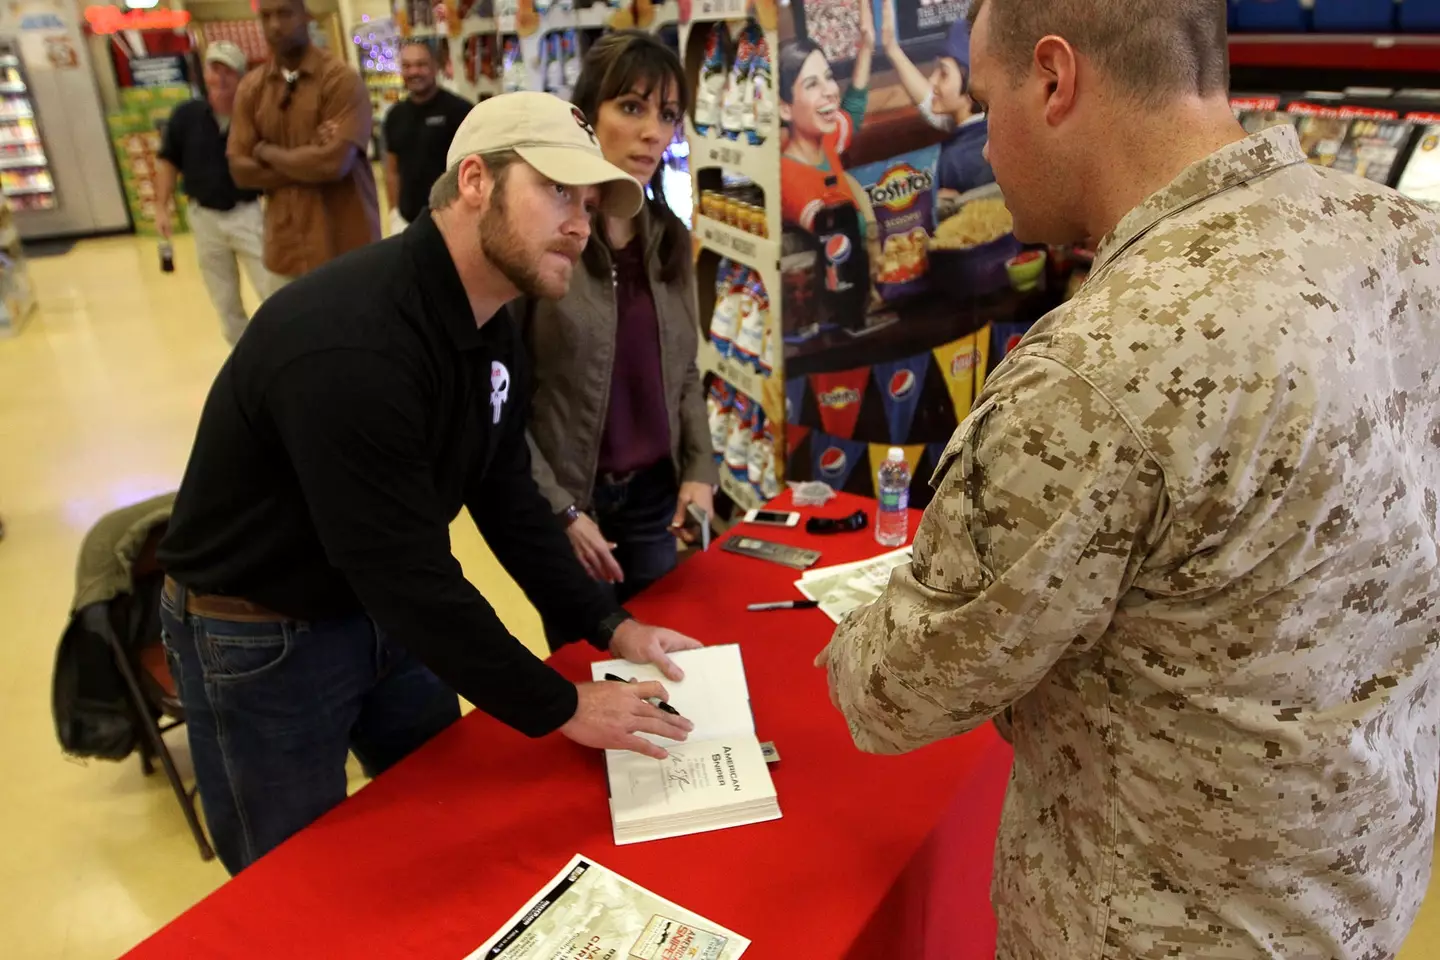 Chris Kyle's book, American Sniper, became a best seller and was later turned into a movie.